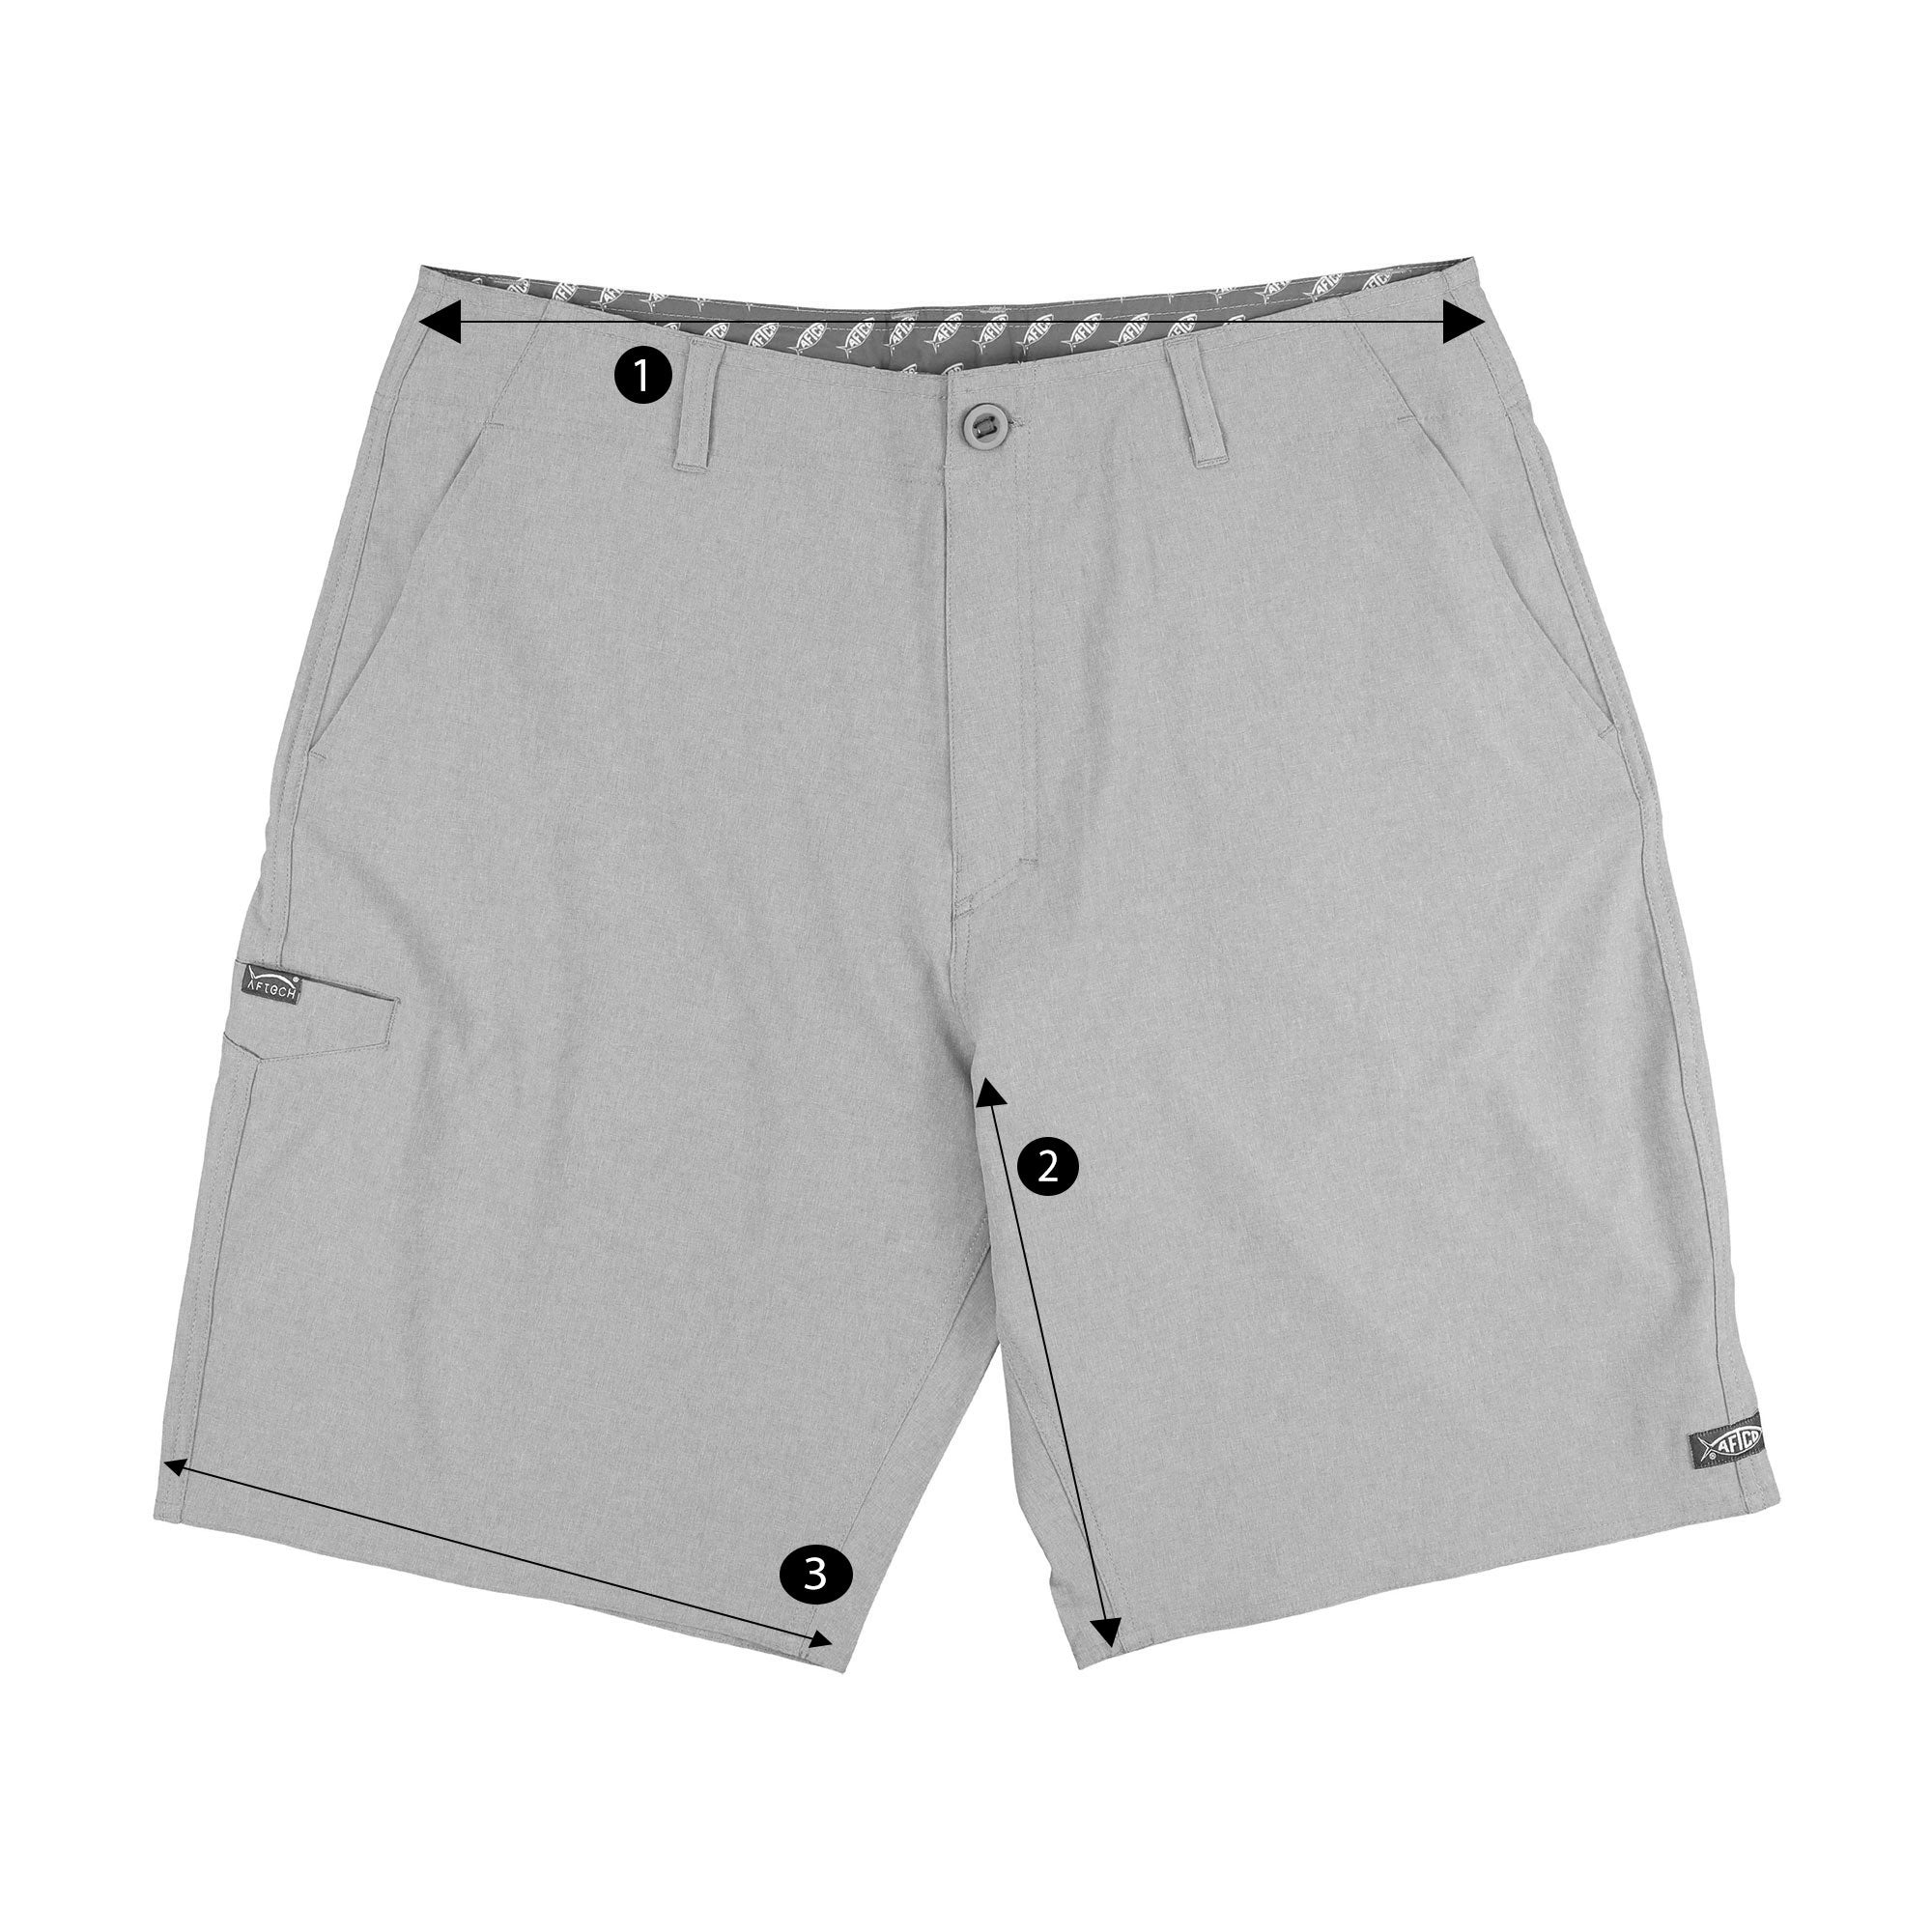 The Perfect Boat Shorts - Cloudburst by AFTCO